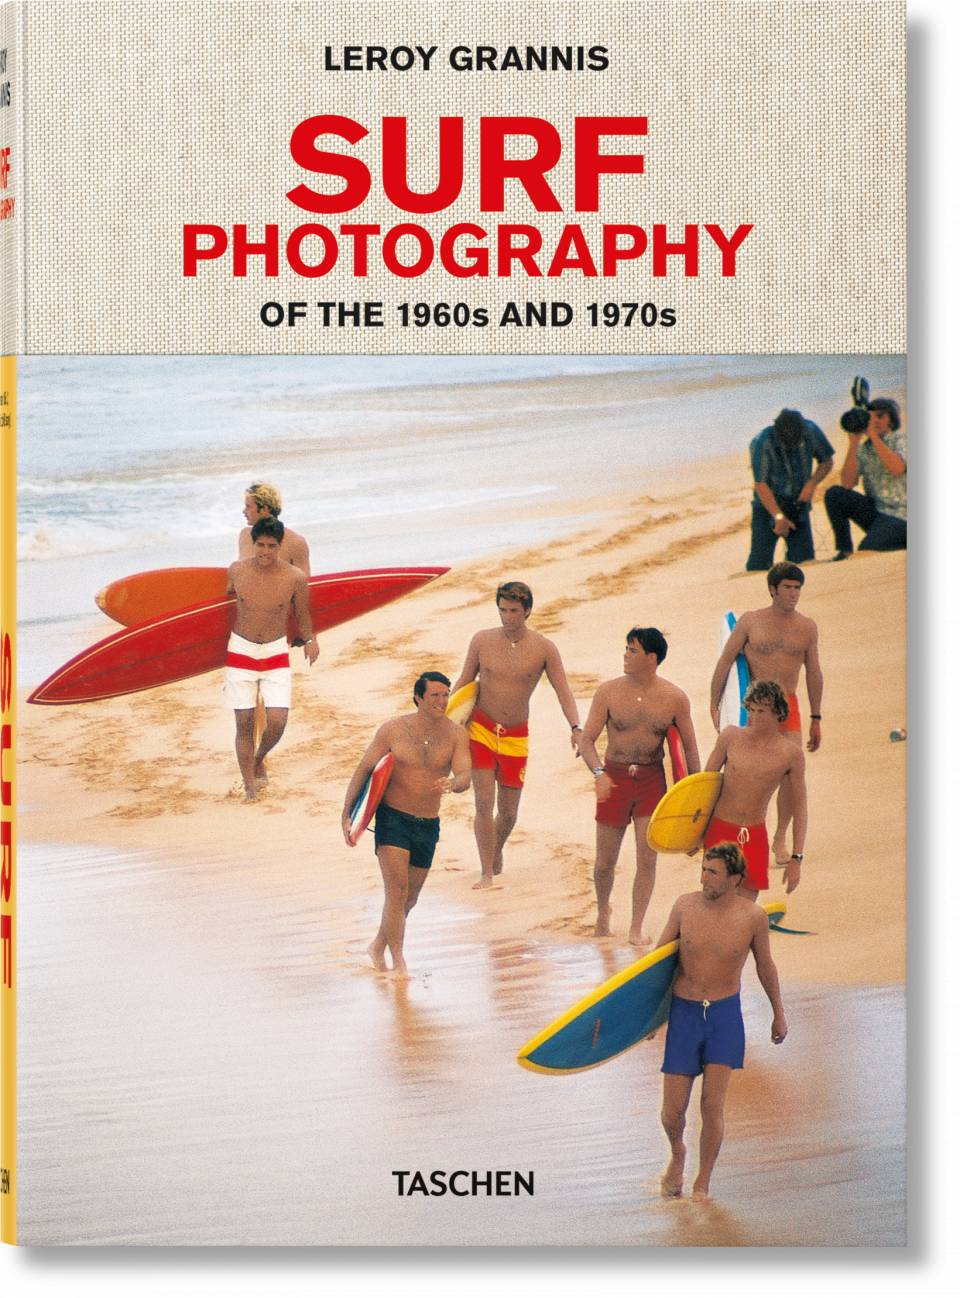 TASCHEN BOOKS - LeRoy Grannis. Surf Photography of the '60s